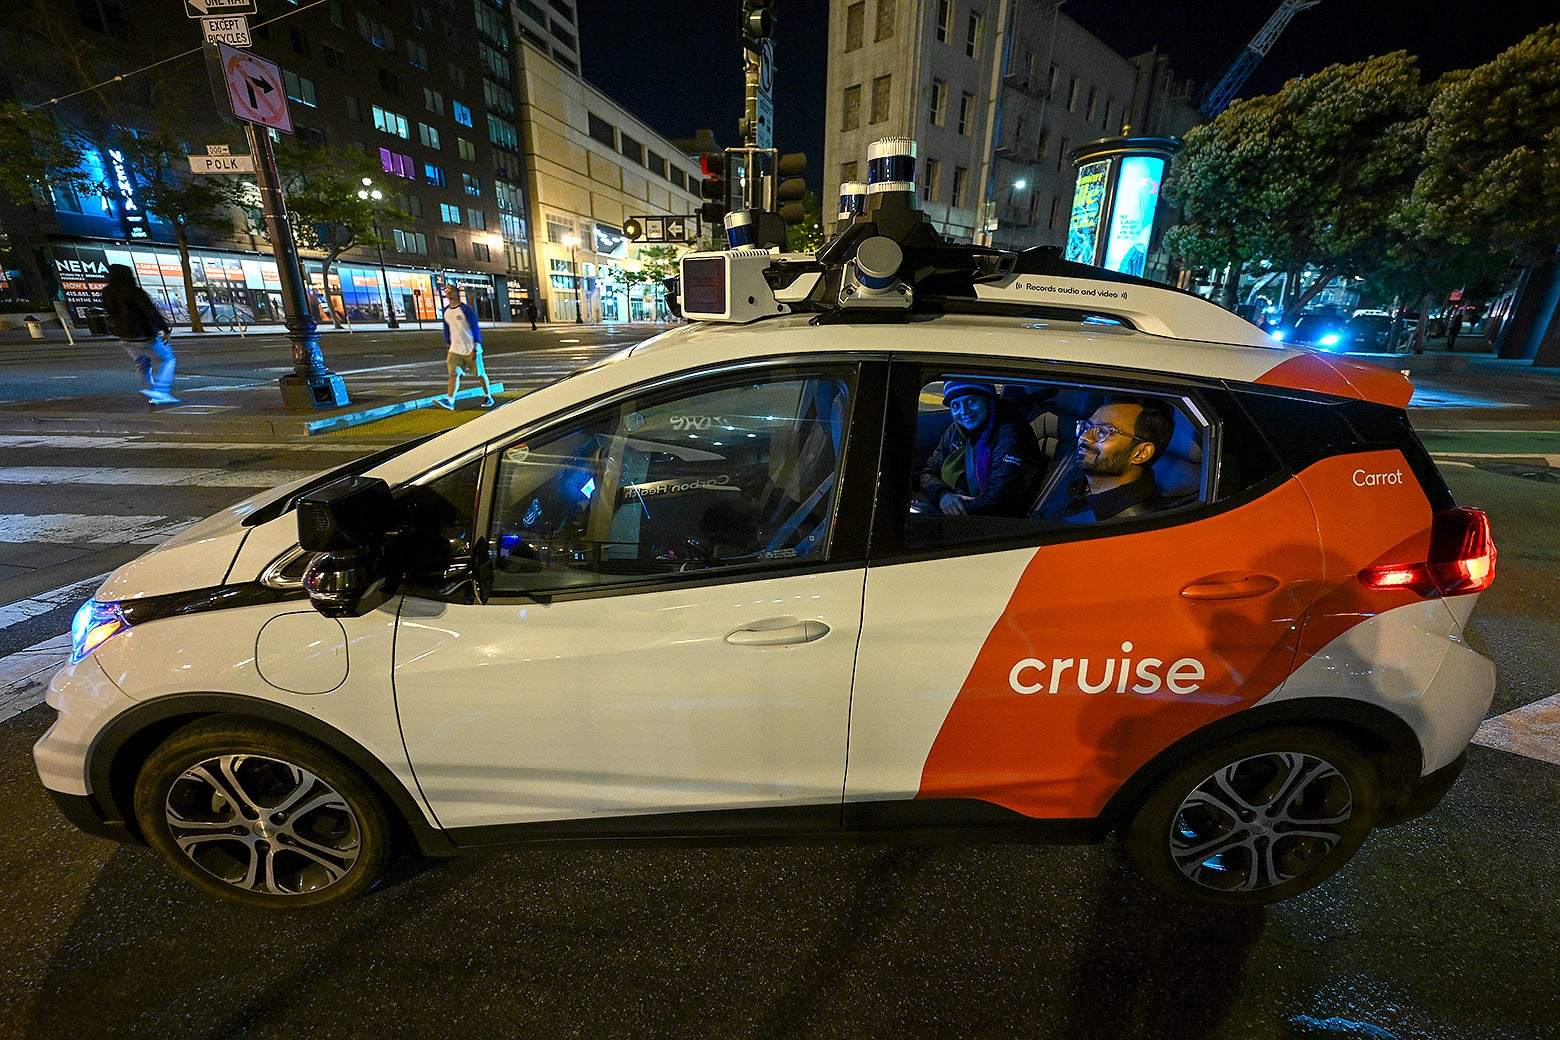 A Cruise vehicle in San Francisco.